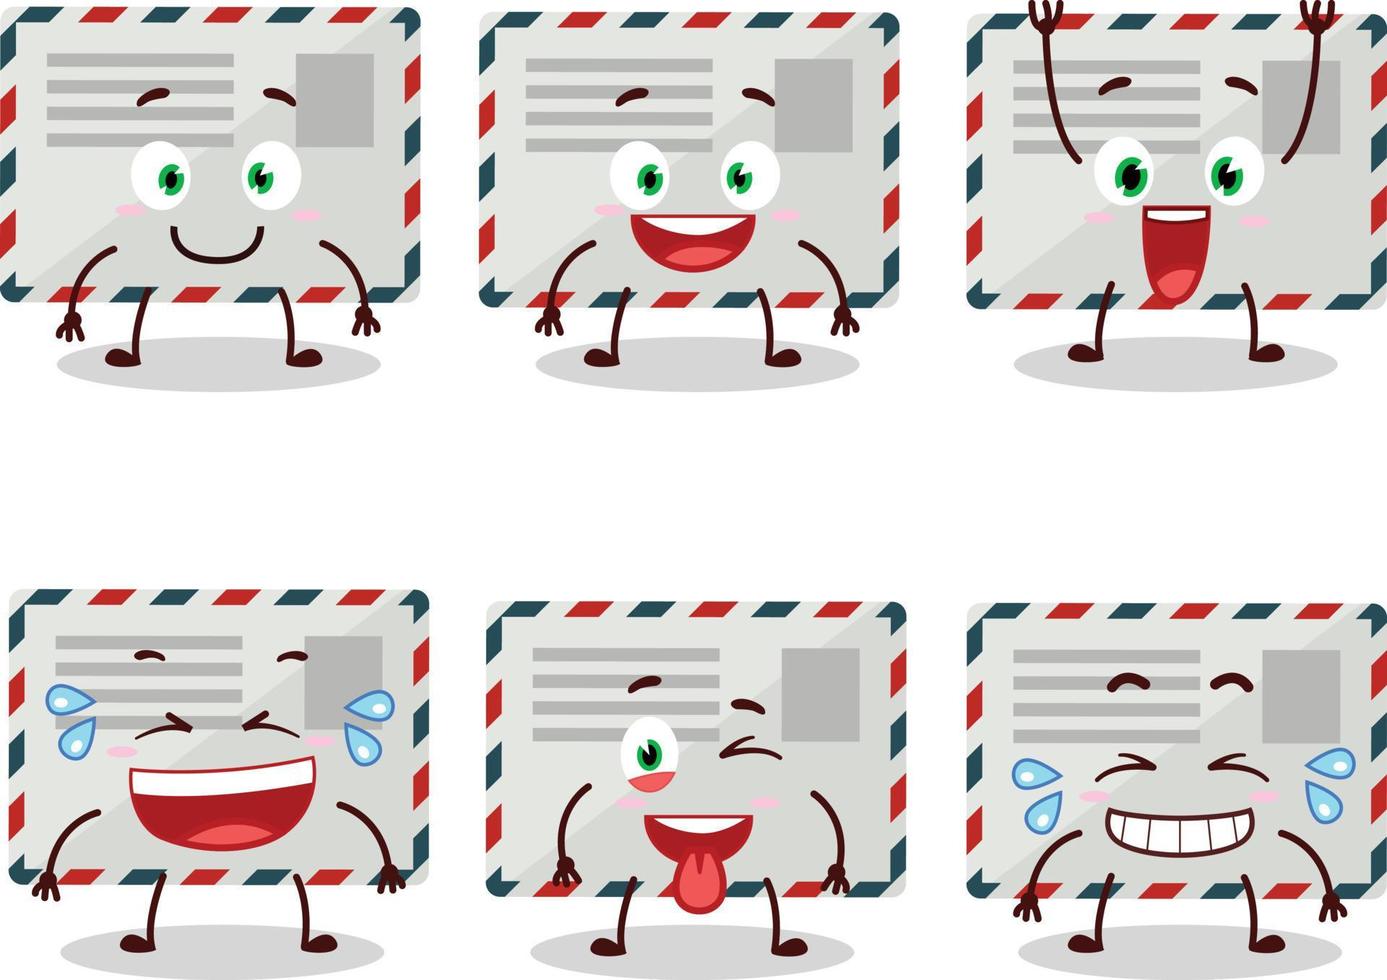 Cartoon character of envelope with smile expression vector